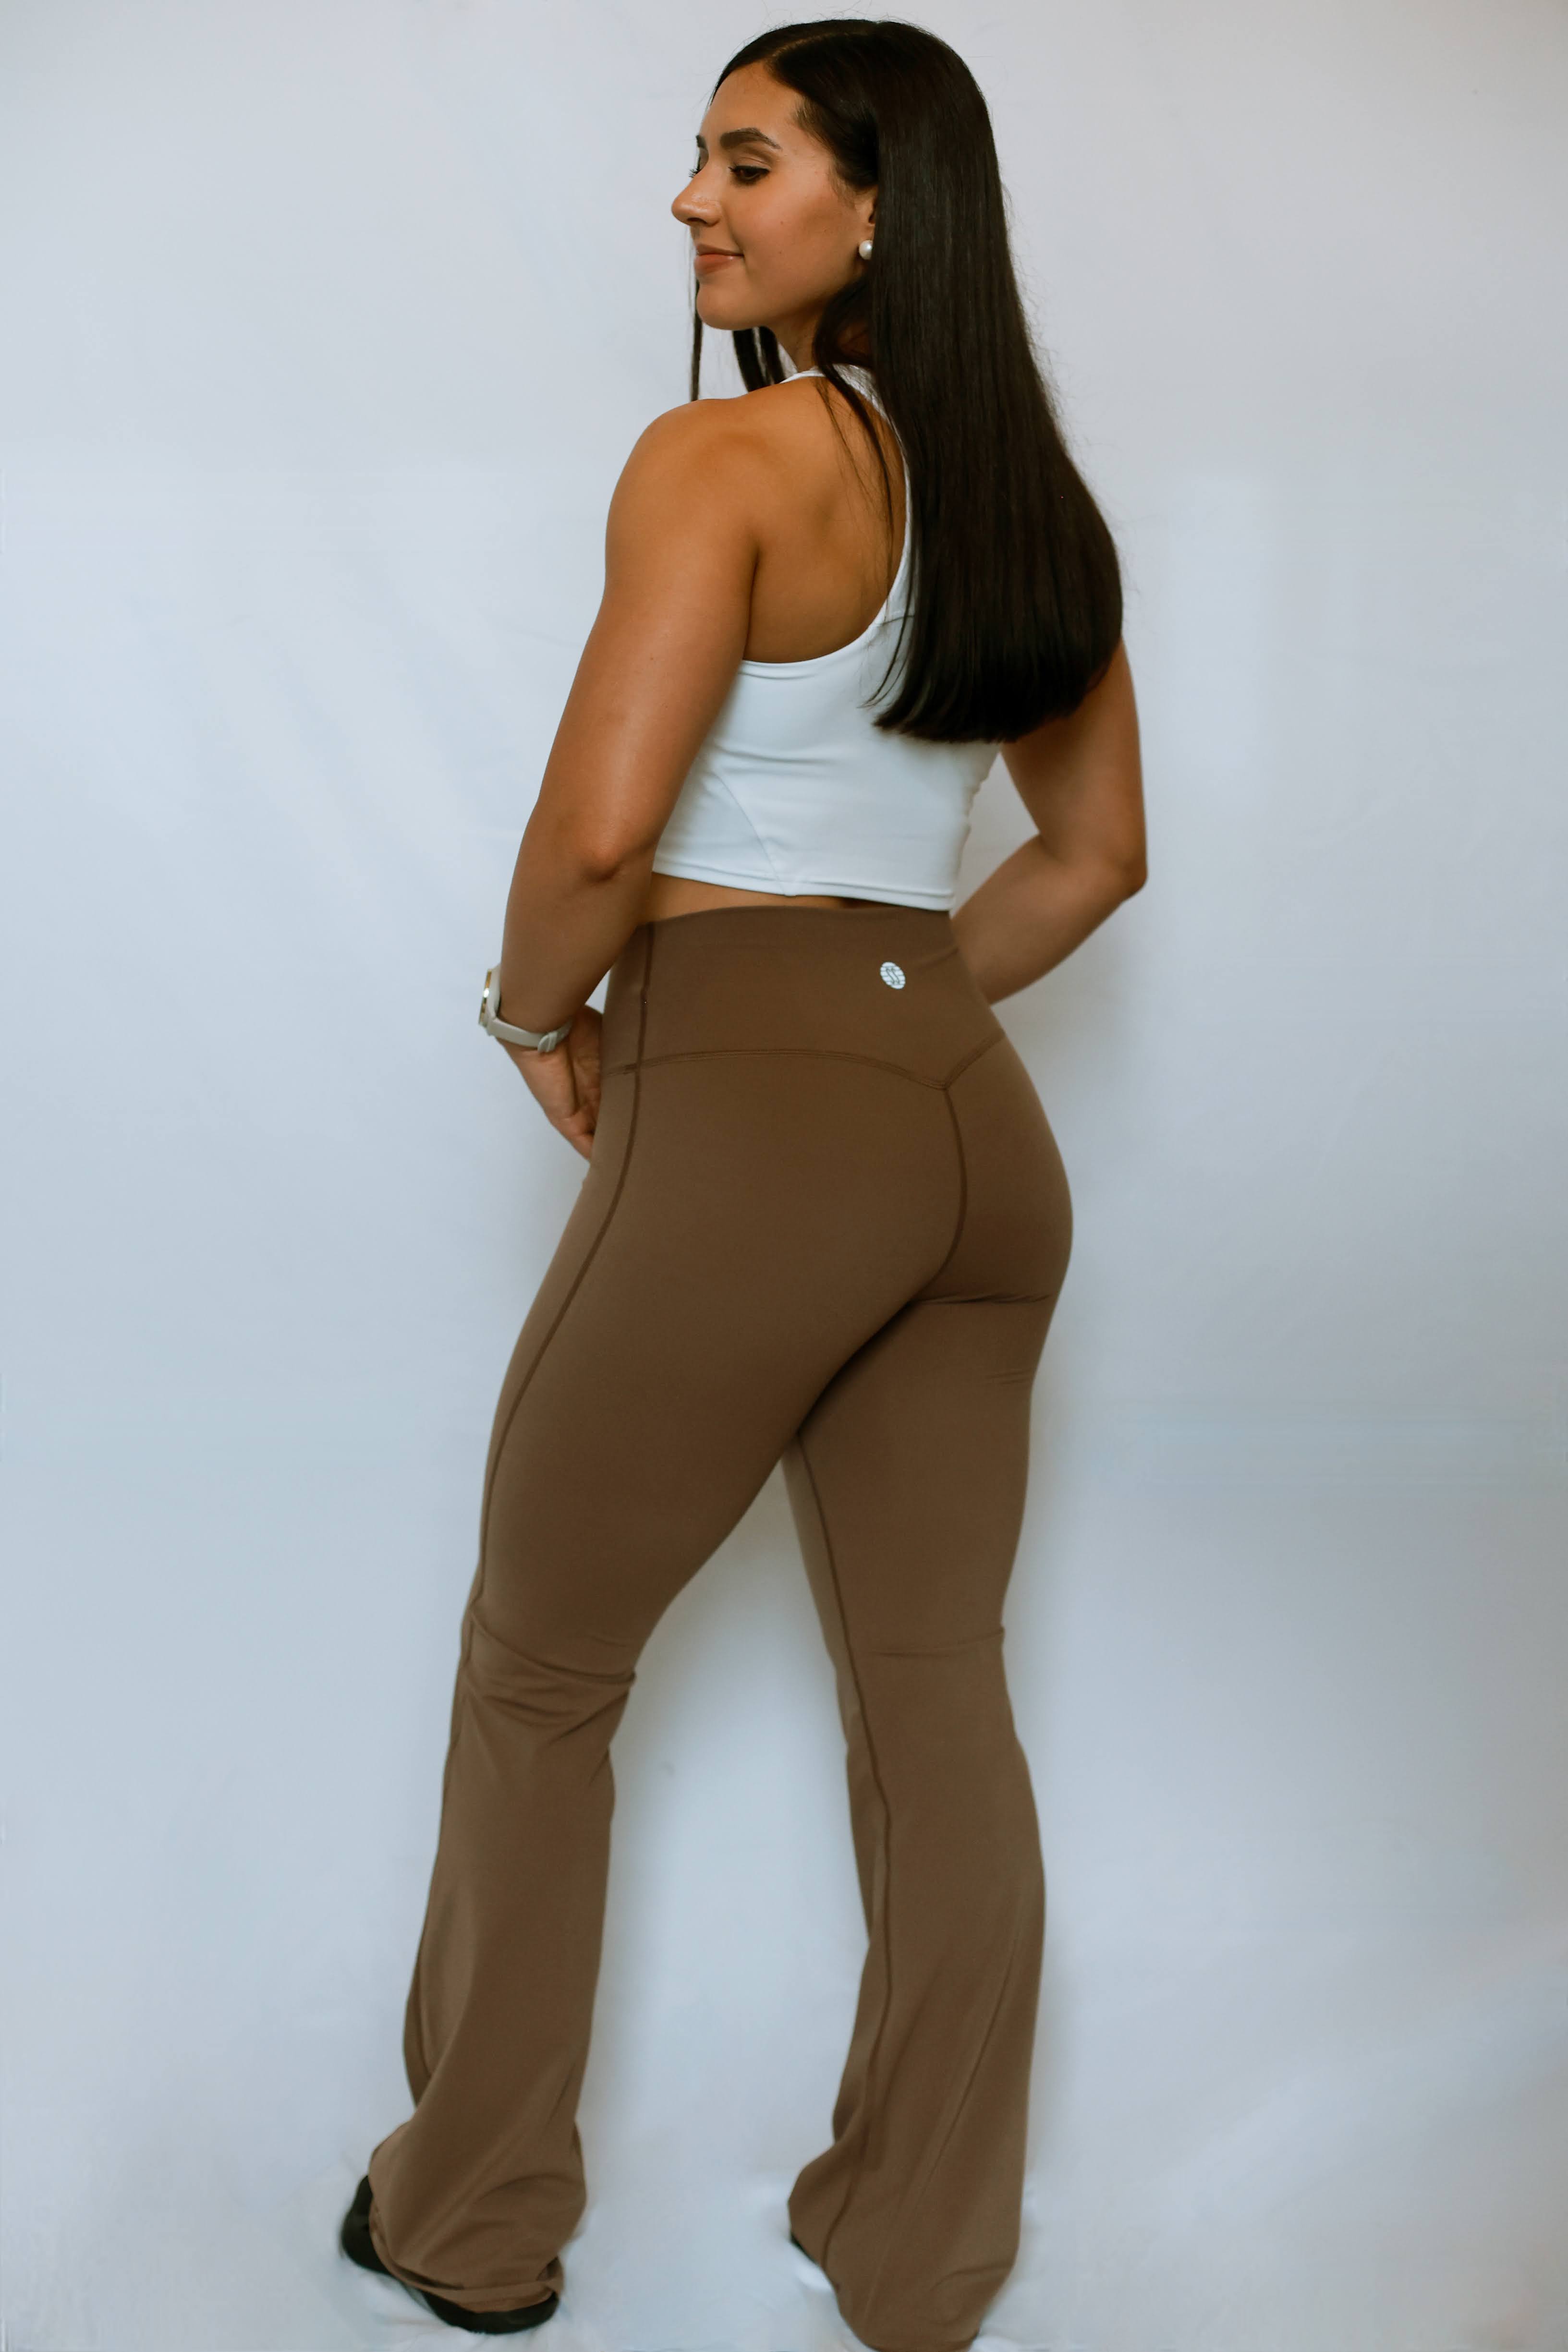 Model turned to the side showing the backside design of the soft yoga flared pants from The Sweat Society.